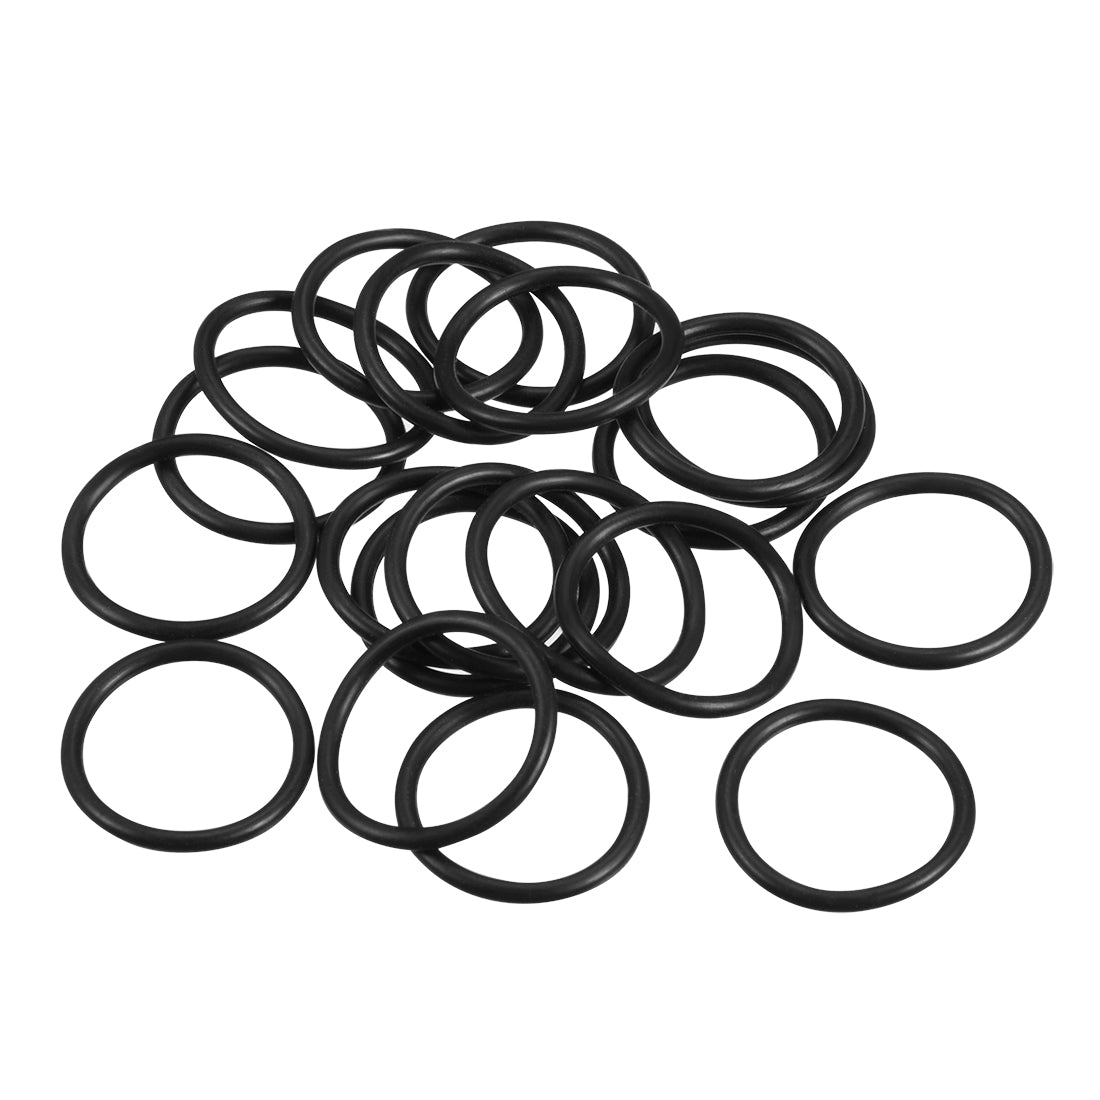 uxcell Uxcell O-Rings Nitrile Rubber 17mm x 20.6mm x 1.8mm Seal Rings Sealing Gasket 20pcs